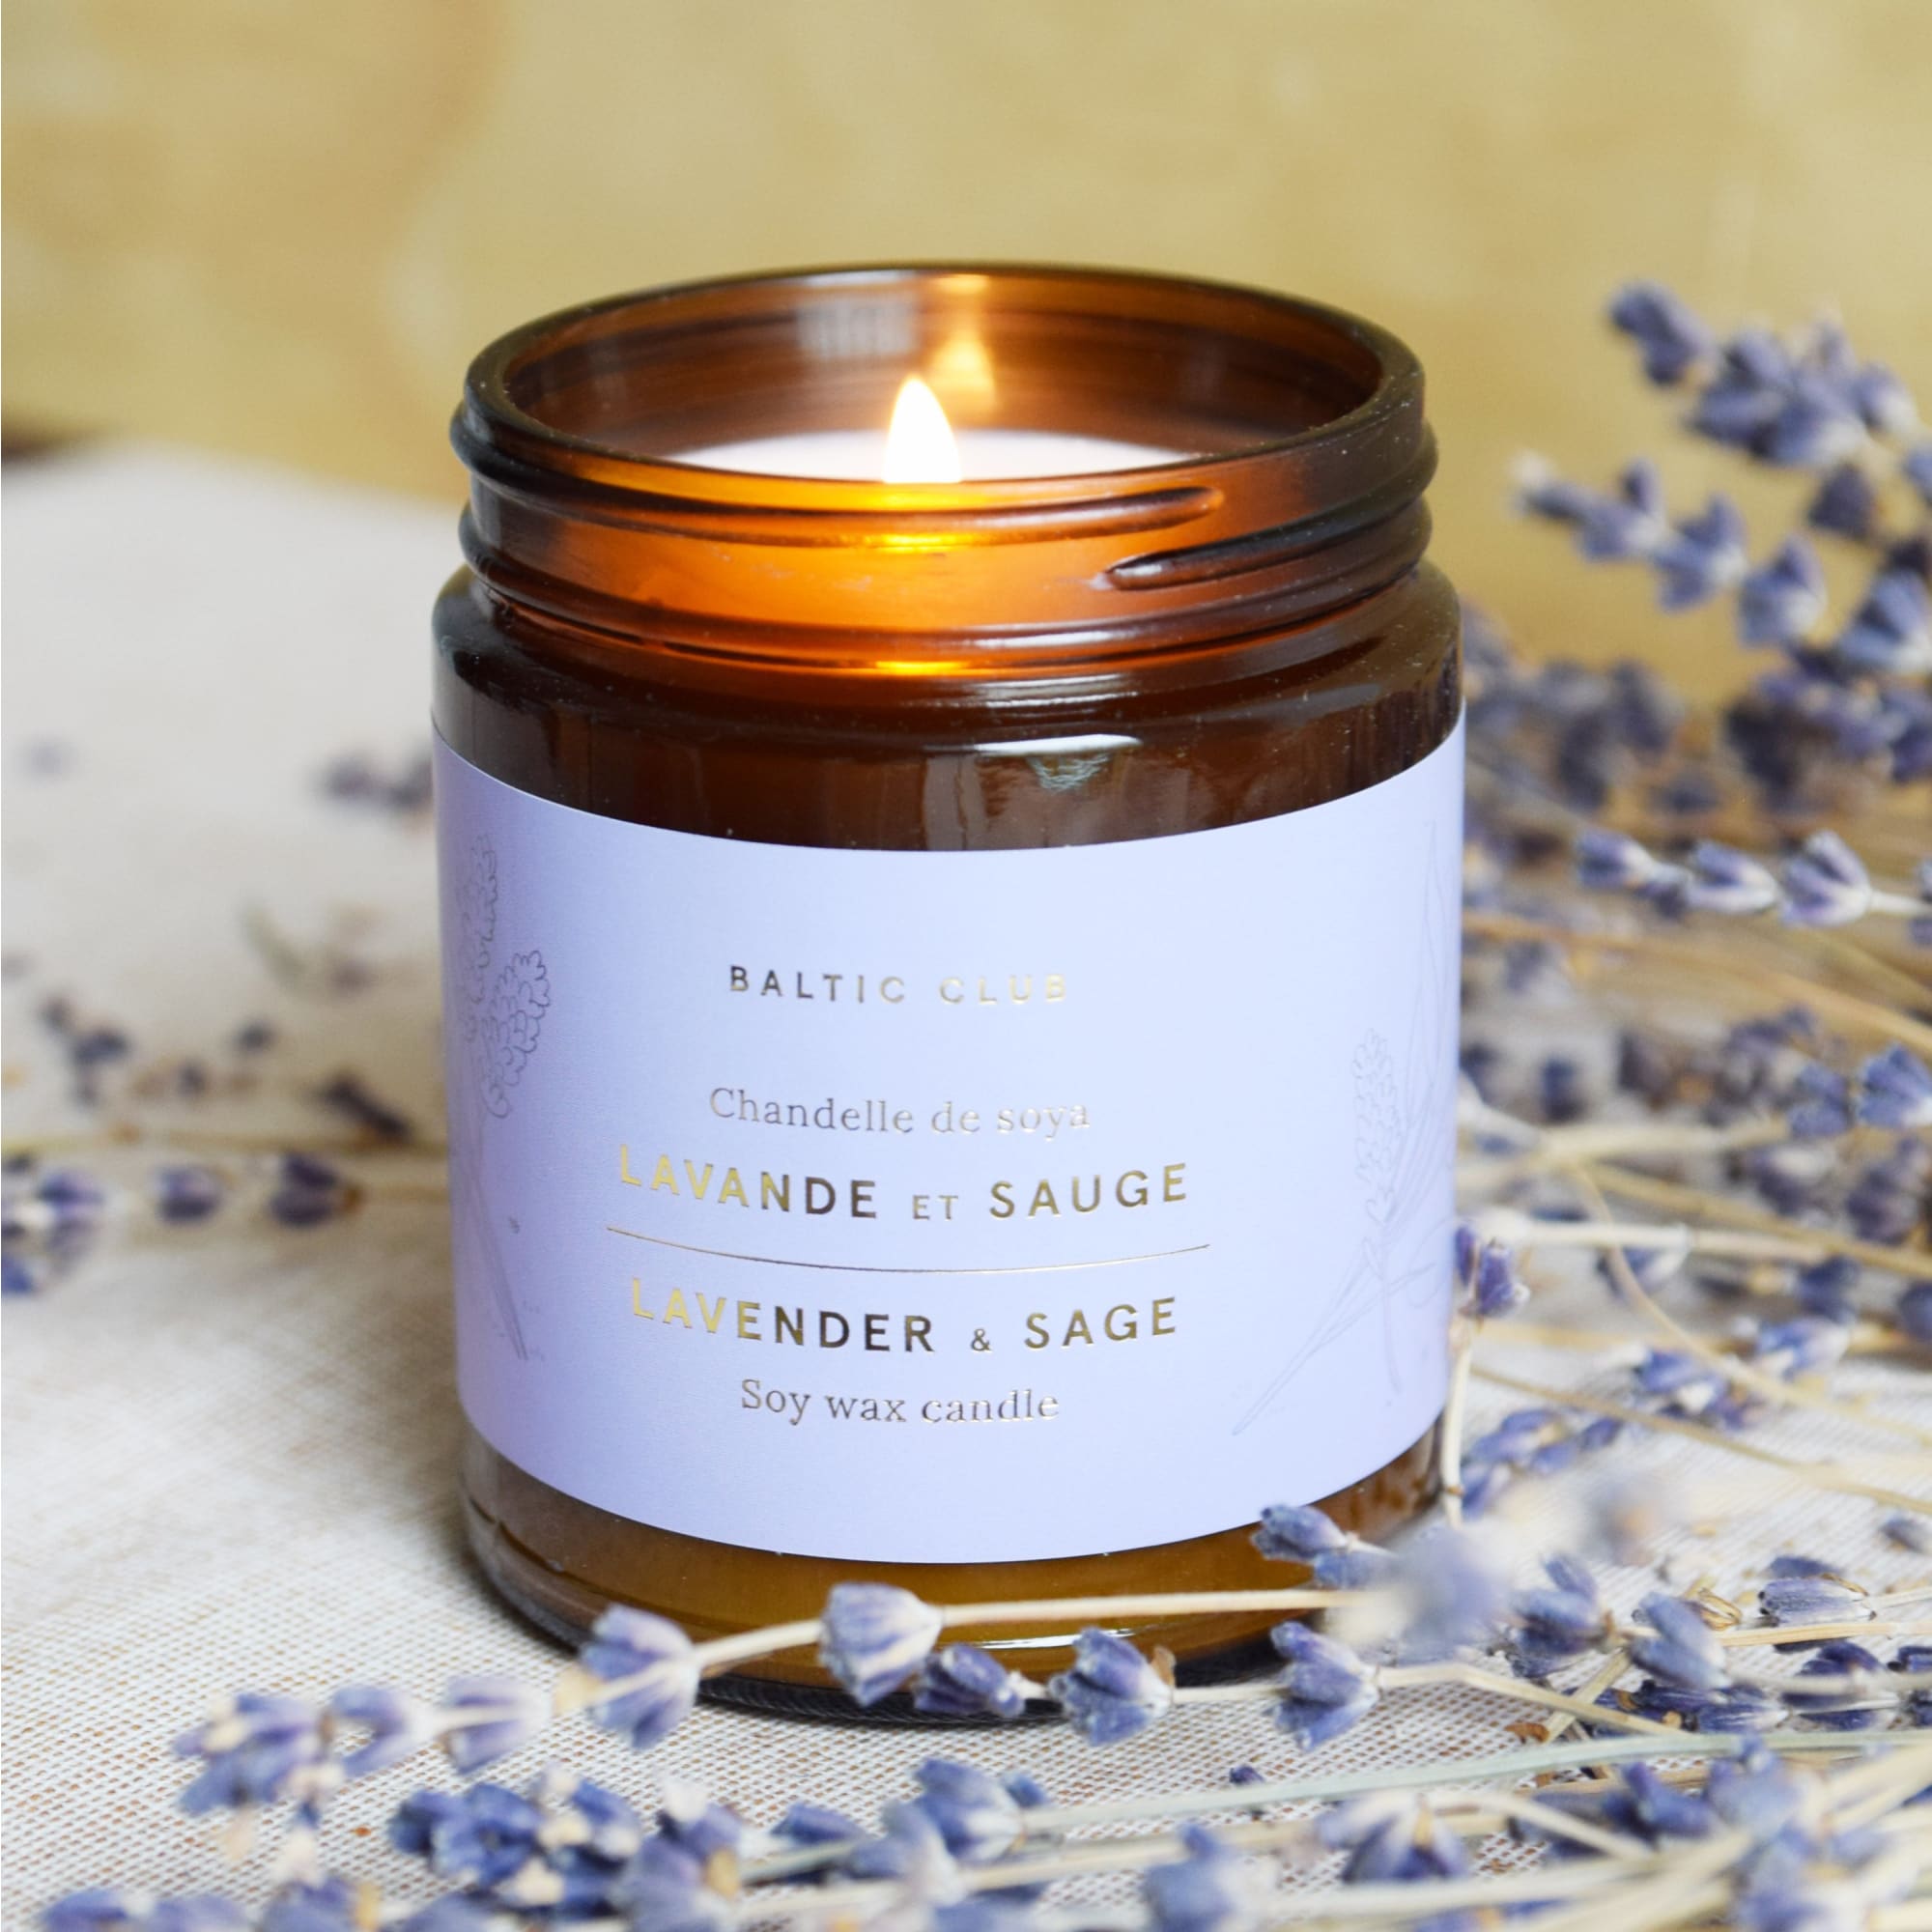 The Baltic Club's Lavender & Sage Soy Candle lit and featured with lavender branches